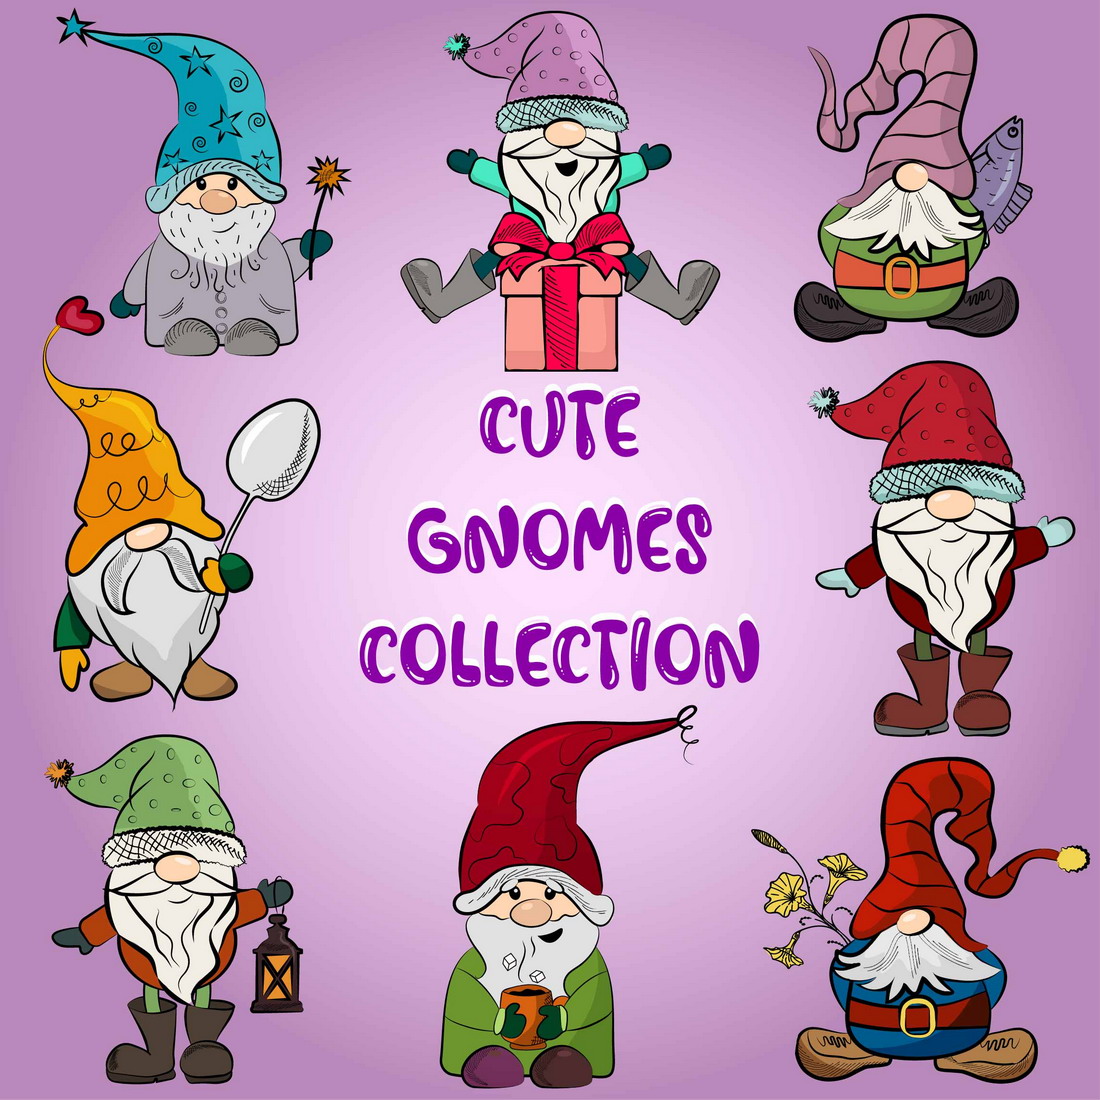 Cute Gnomes Collection.